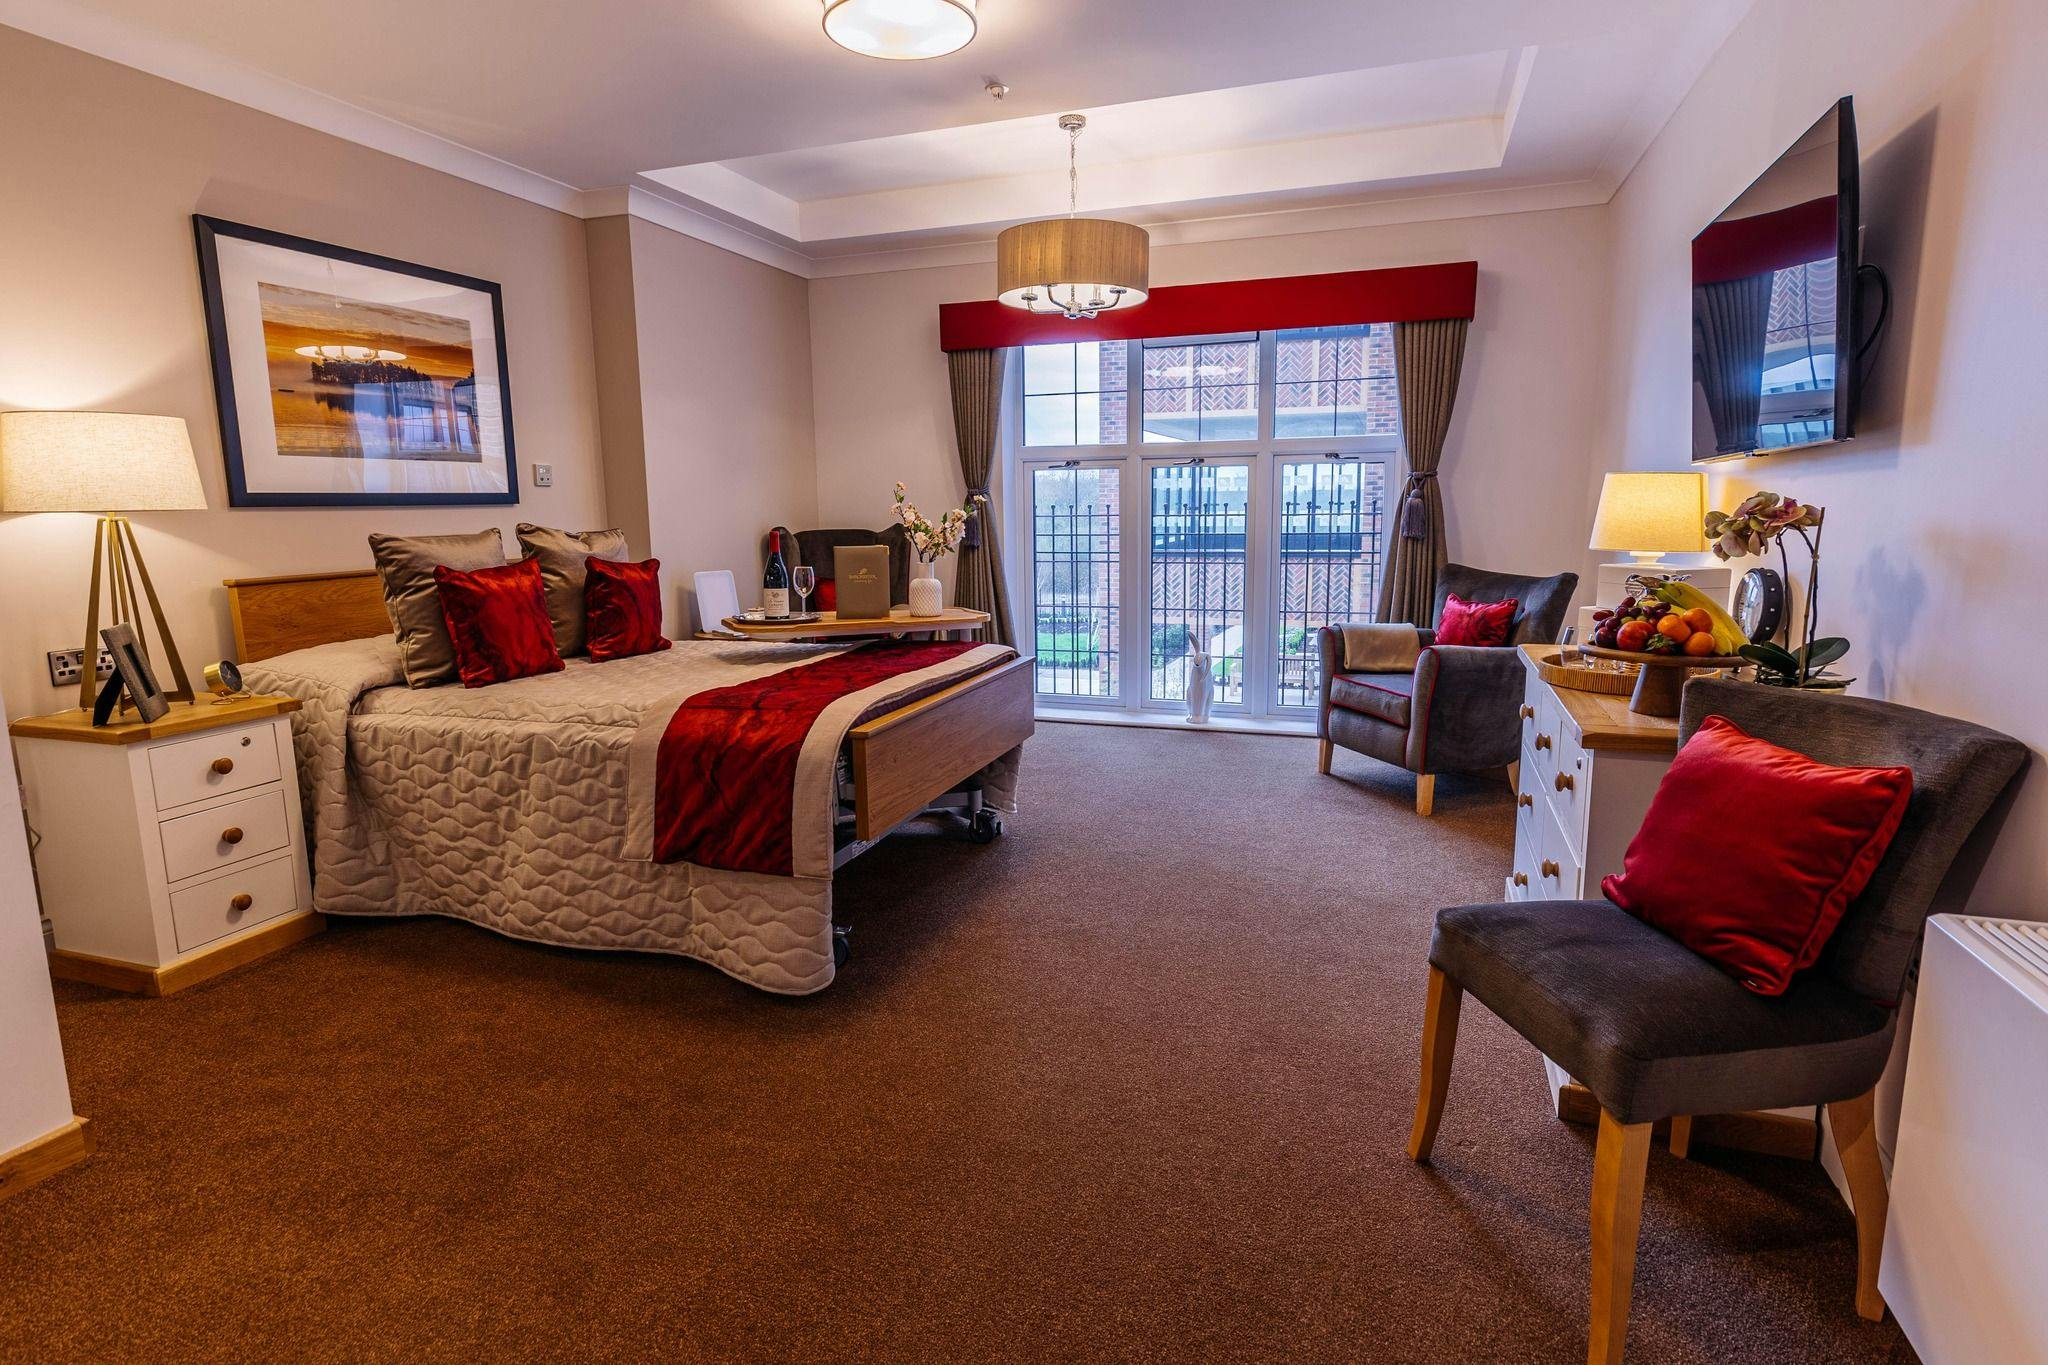 Bedroom  at Sycamore Grove Care Home in Eastbourne, East Sussex